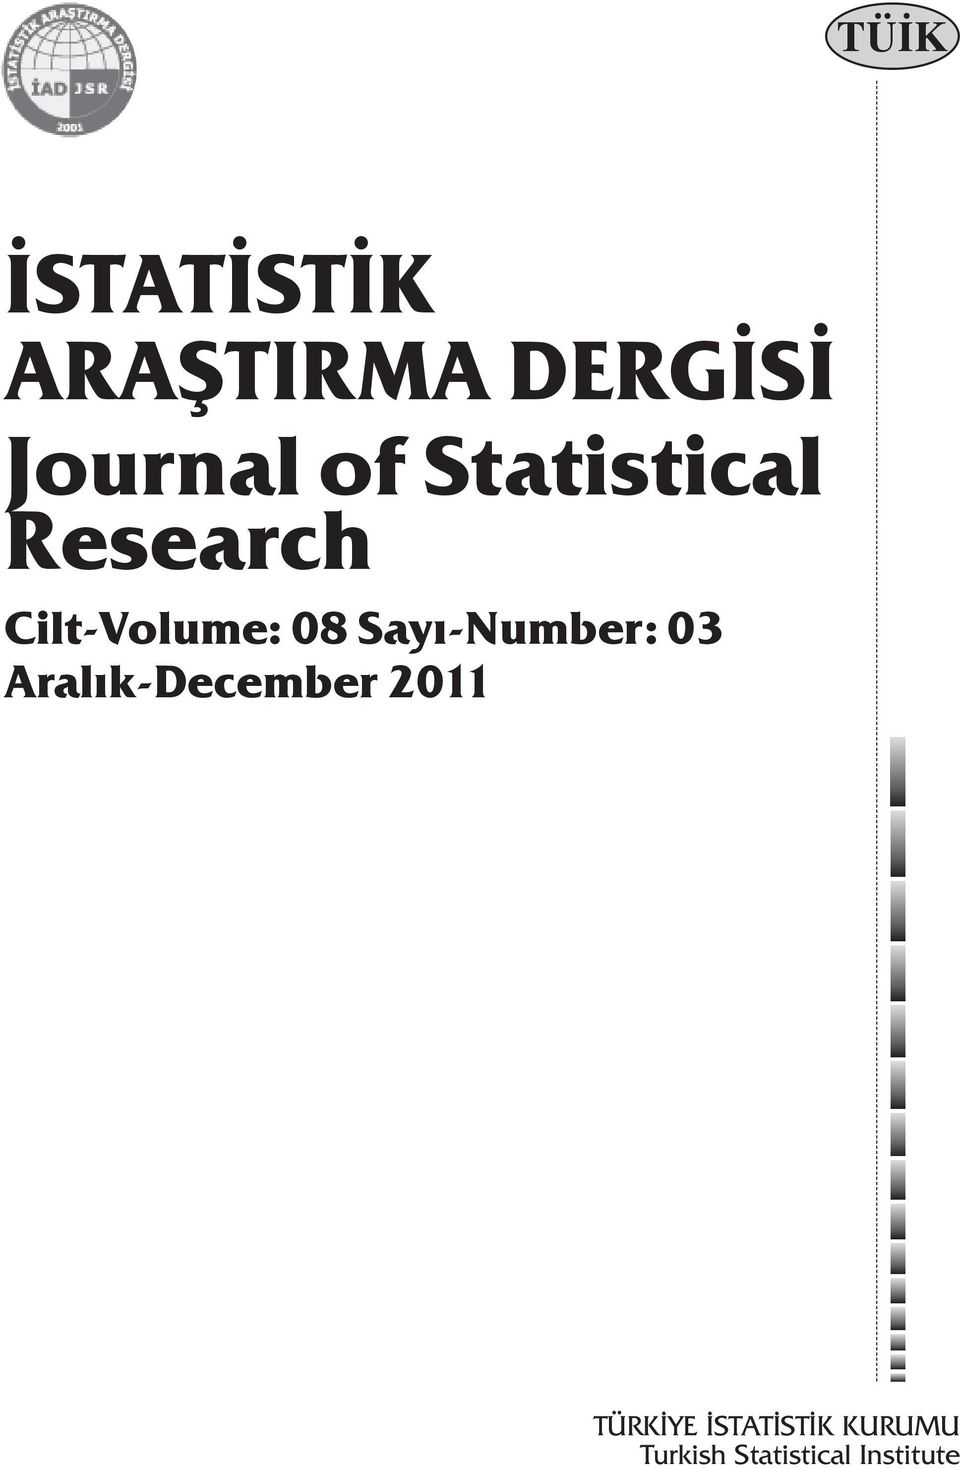 Statistical Research